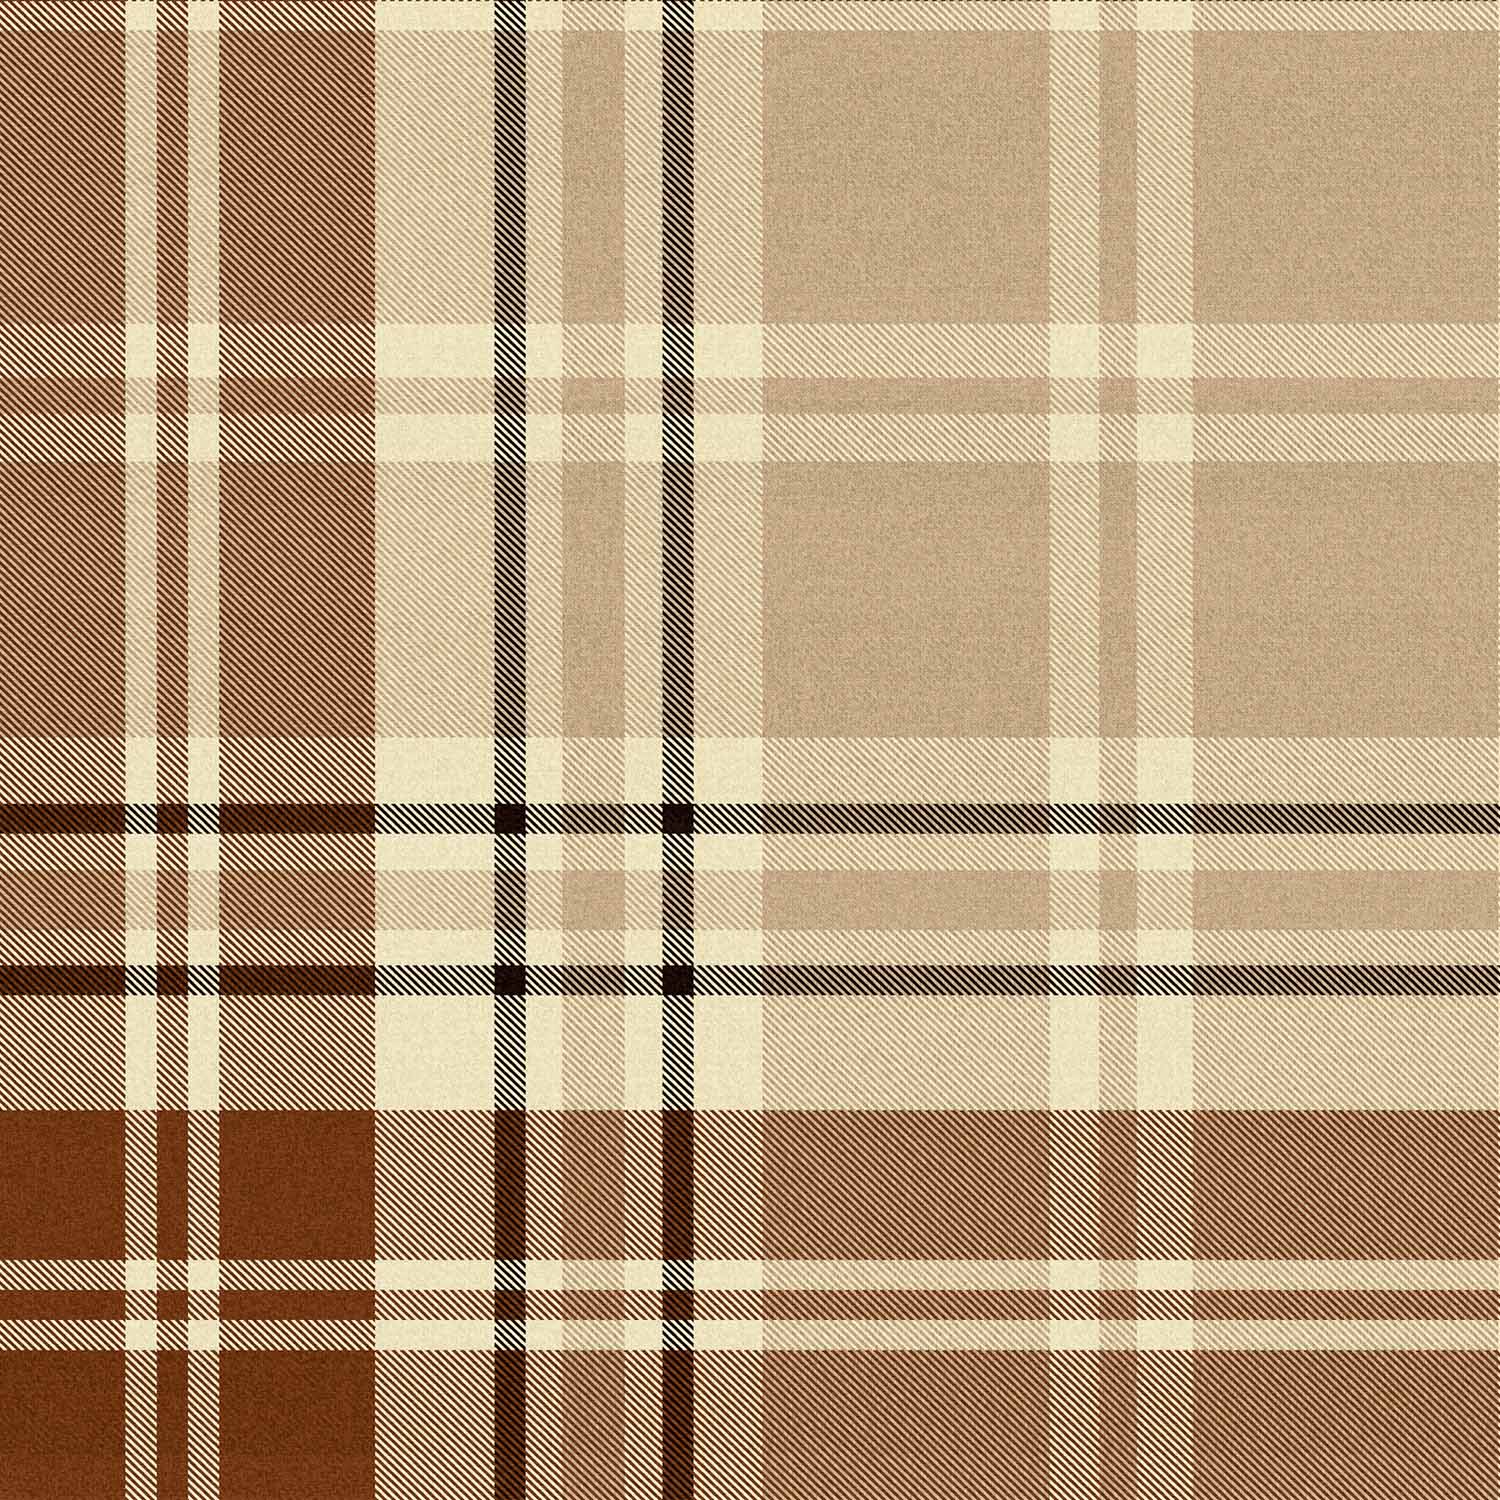 images/productimages/small/chesterfield-plaid-cappuccino-52x50cm-wp30080.jpg